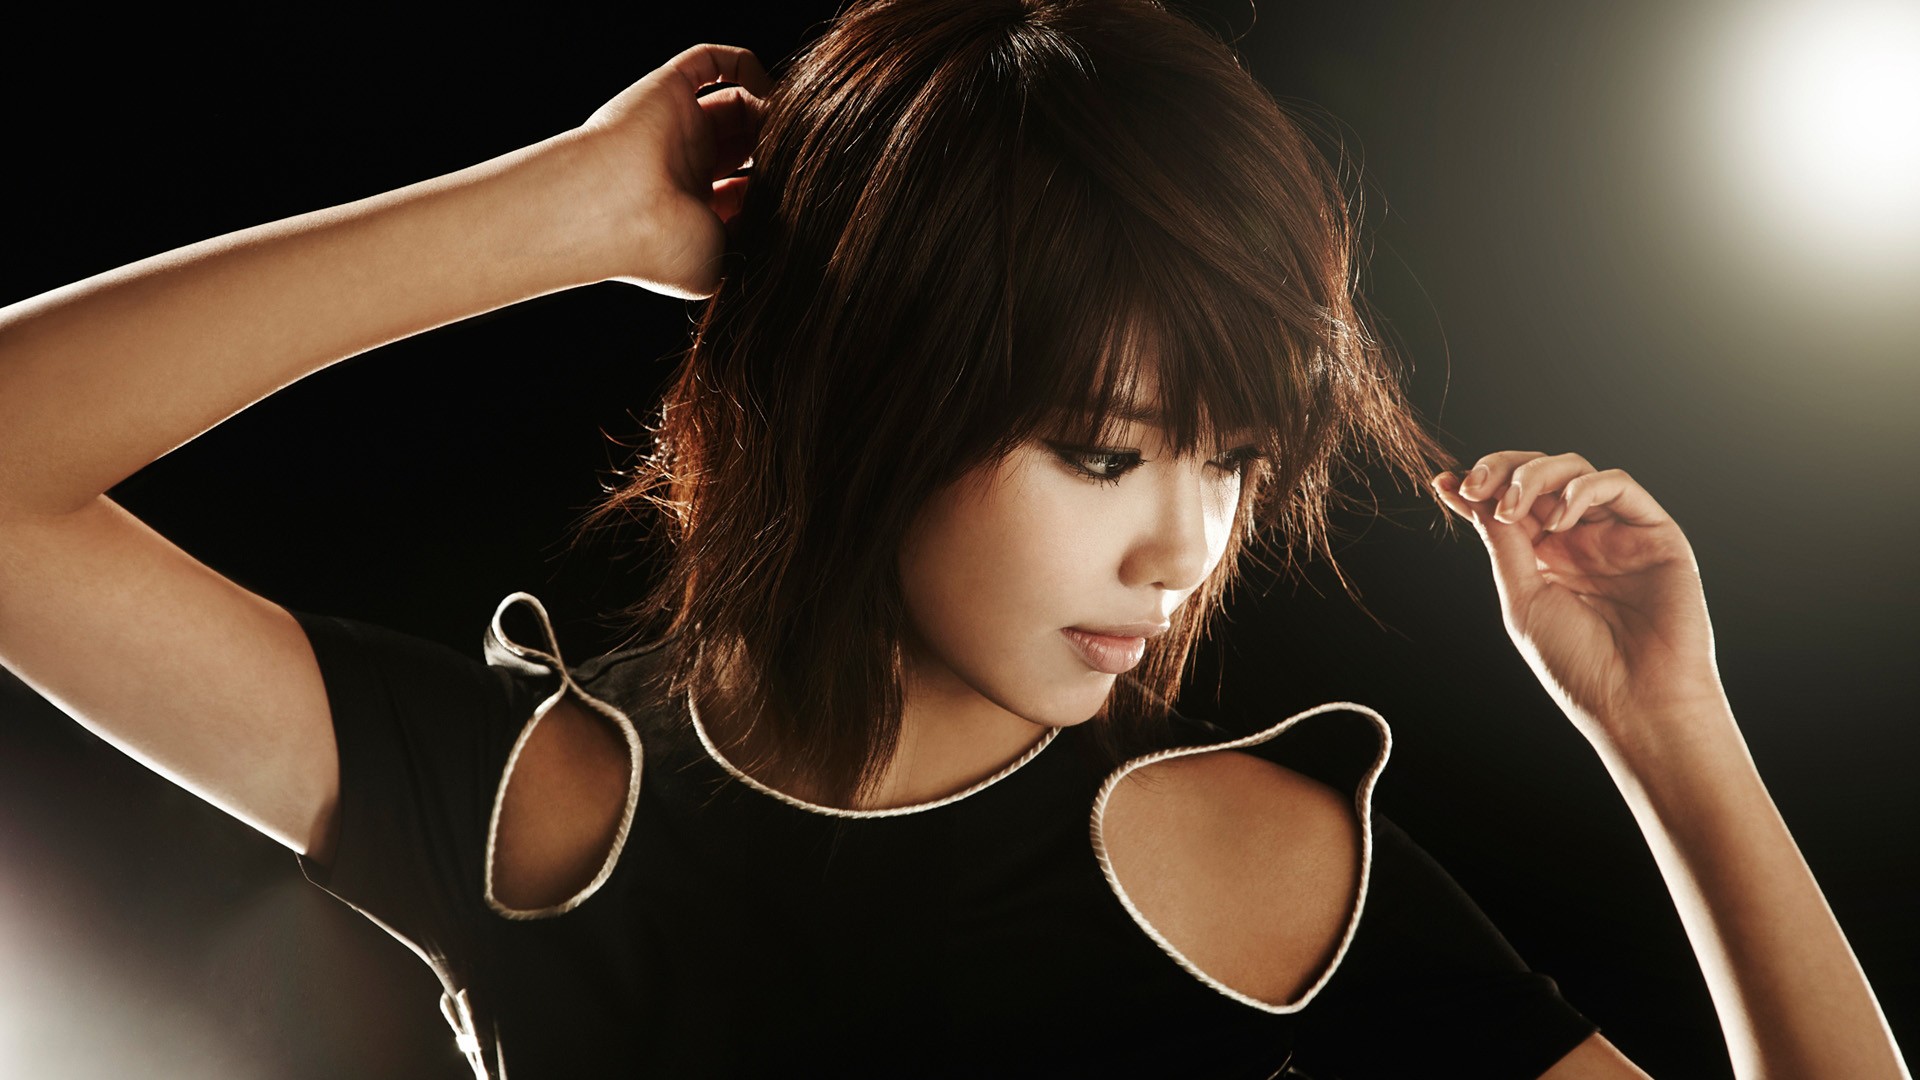 People 1920x1080 women brunette model face short hair Asian black dress simple background Choi Sooyoung SNSD looking away arms up makeup women indoors